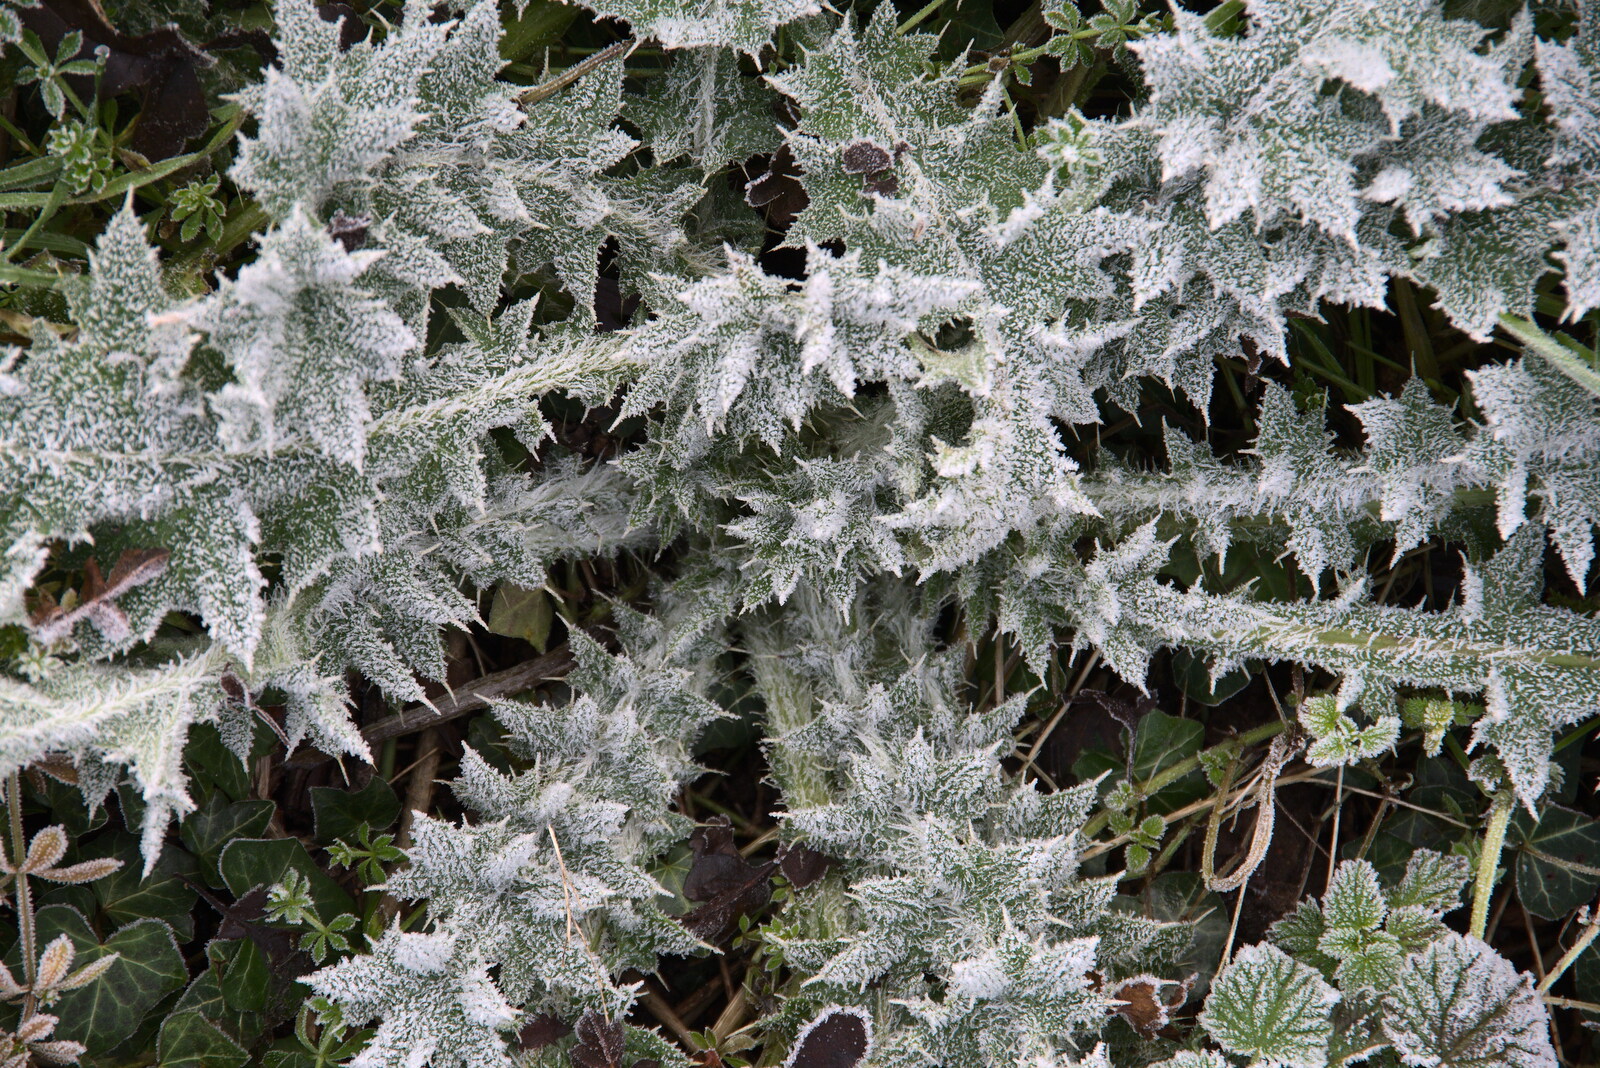 Frosty thistles from A Virtual New Year's Eve, Brome, Suffolk - 31st December 2020